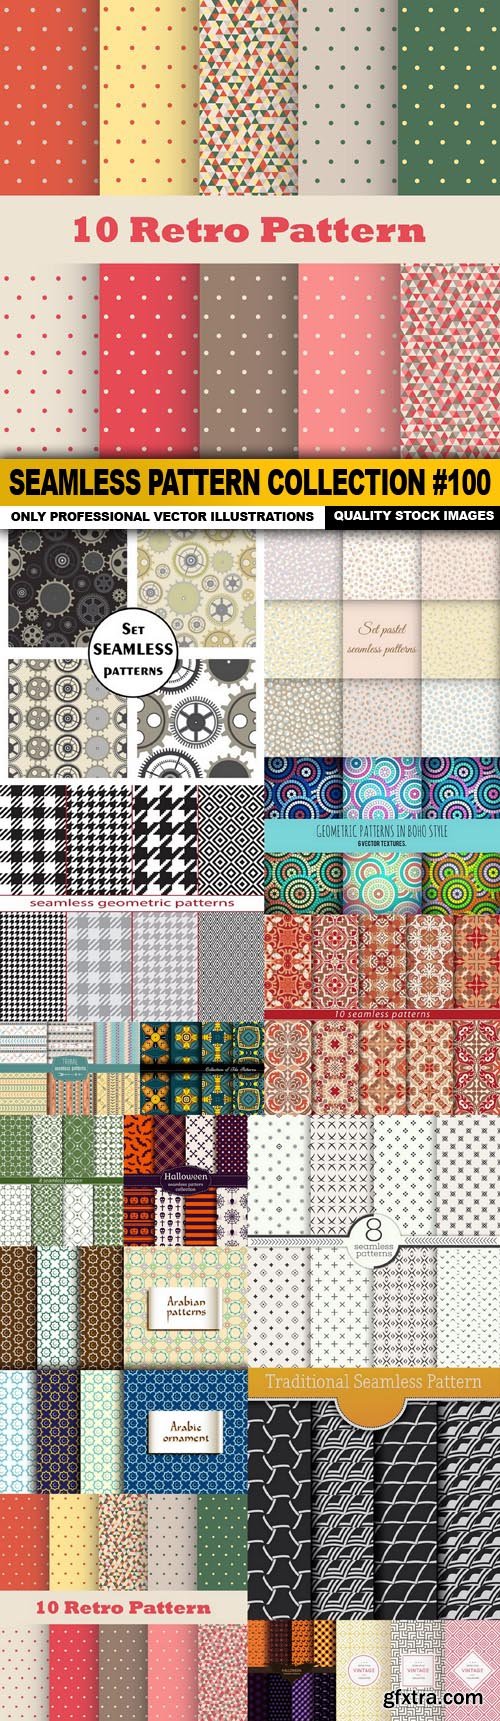 Seamless Pattern Collection #100 - 15 Vector